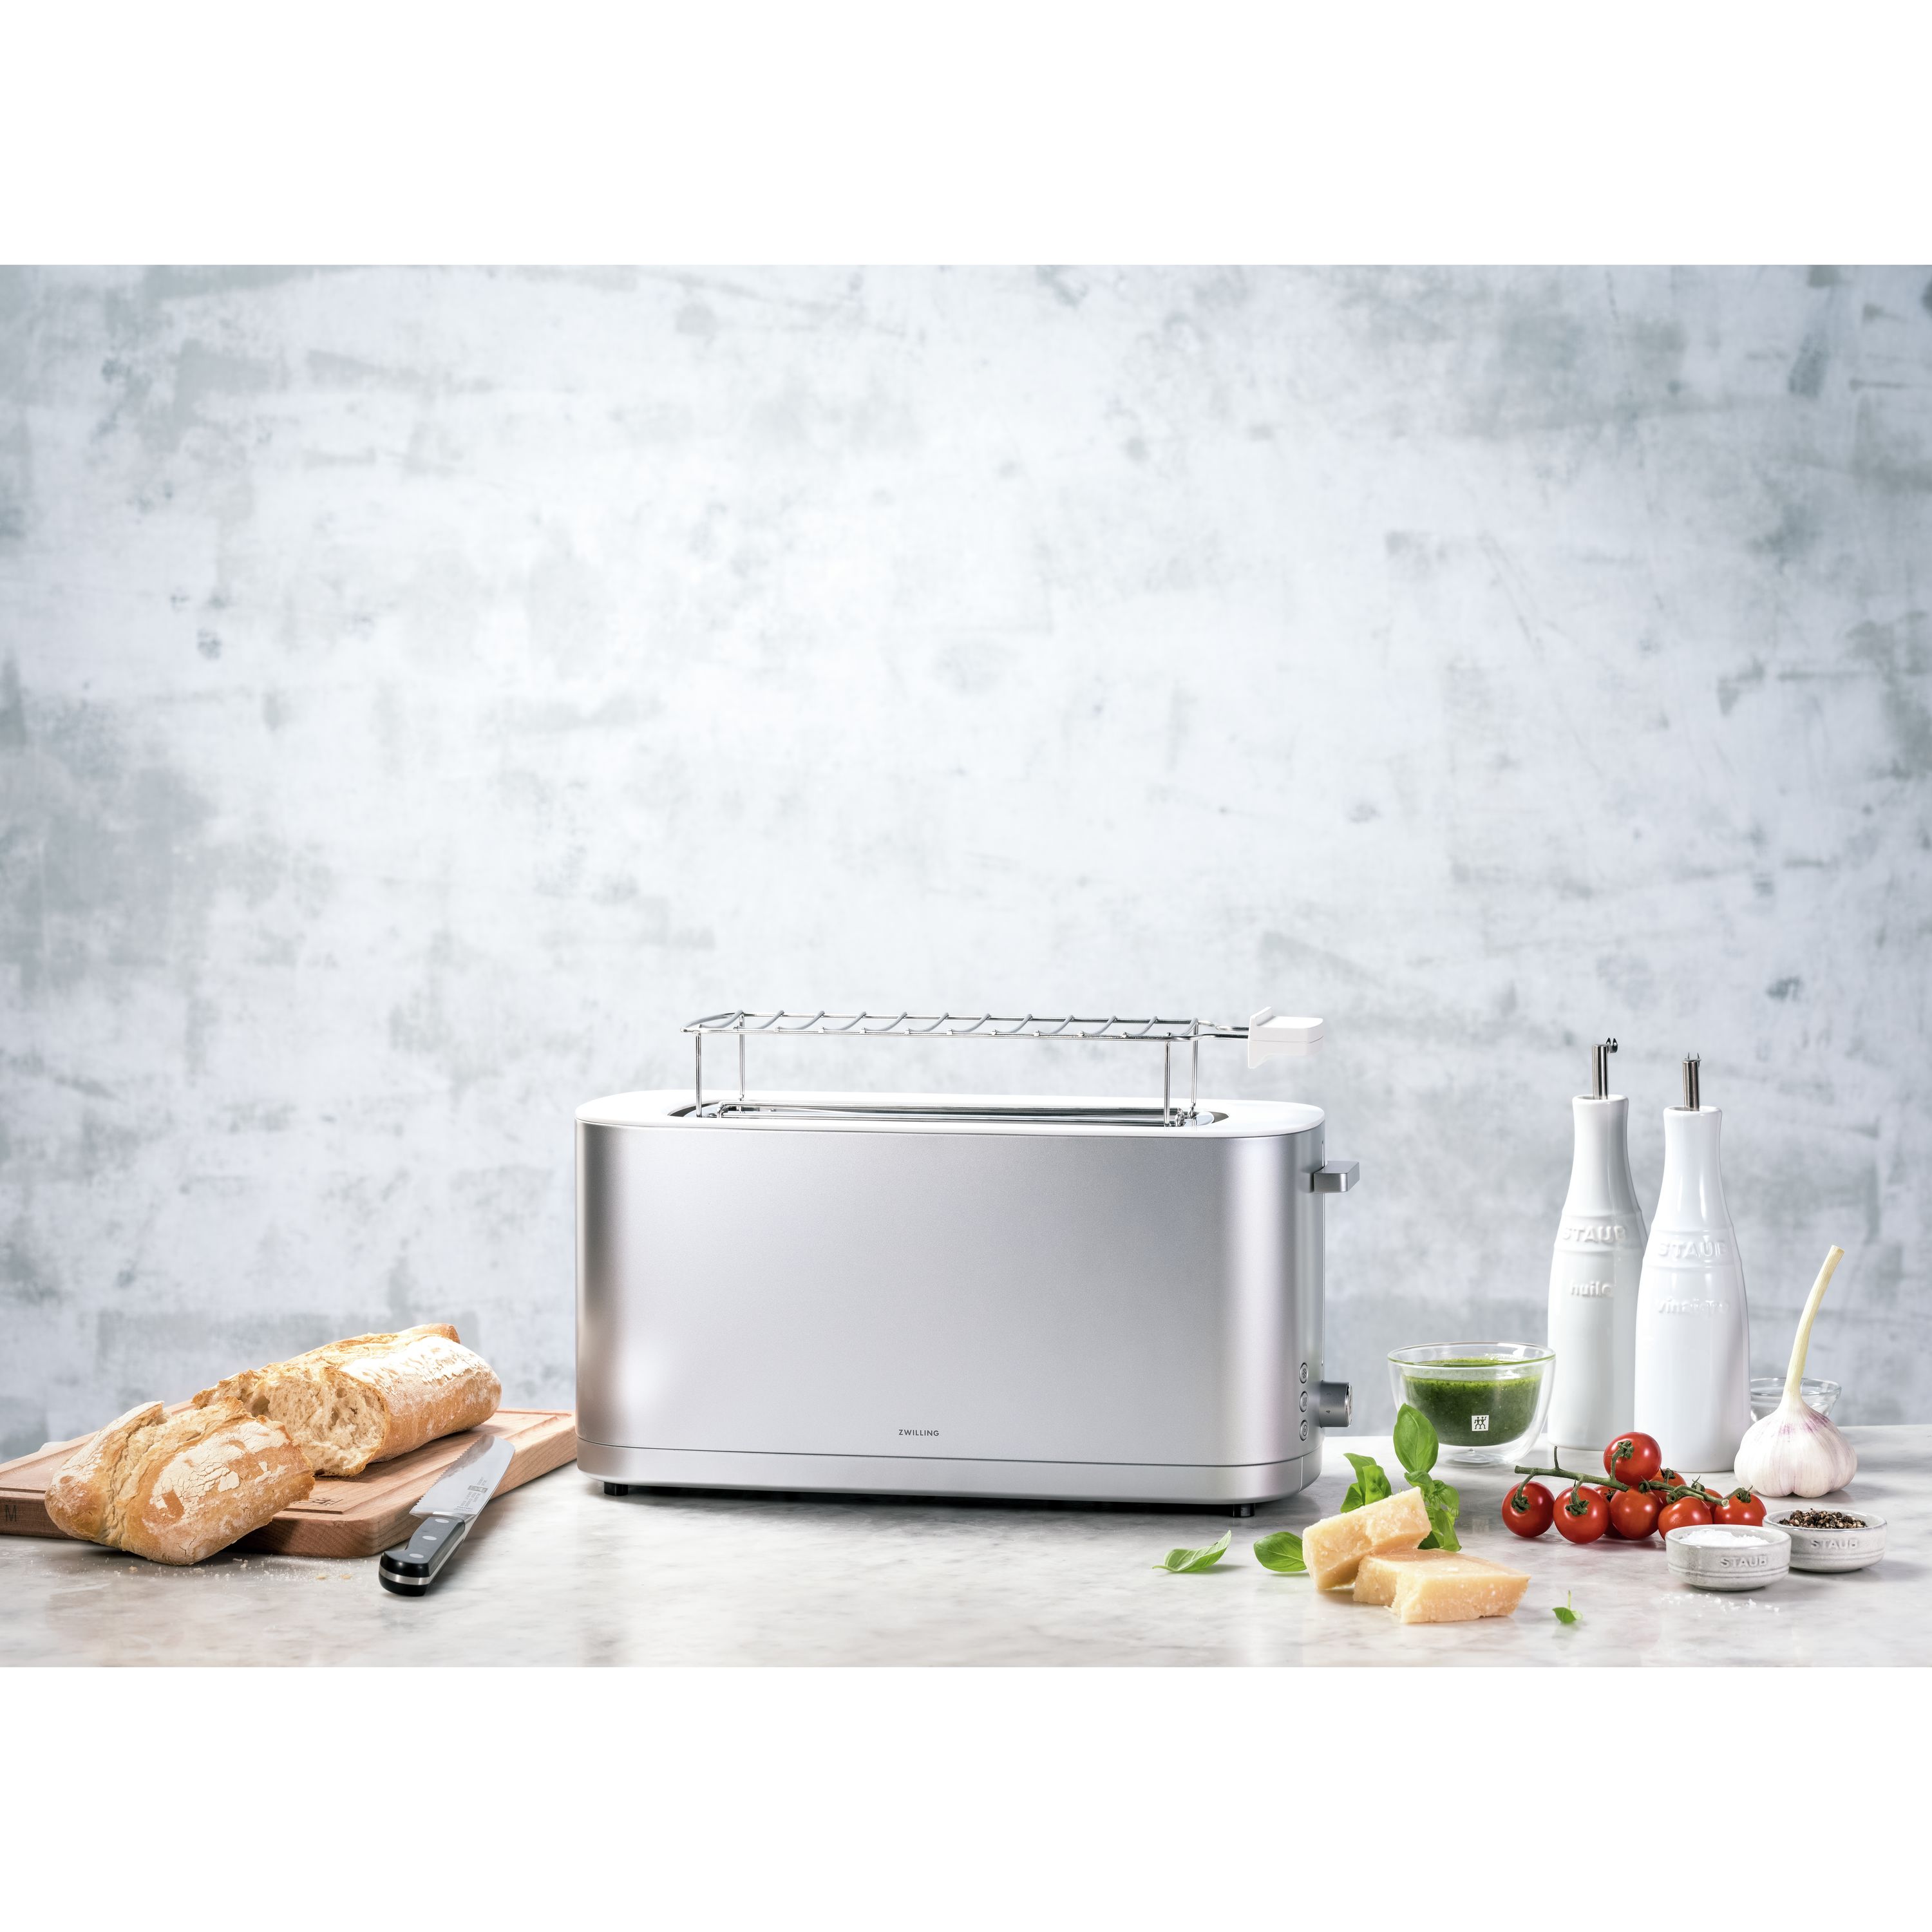  ZWILLING Enfinigy 2 Long Slot Toaster, 4 Slices with